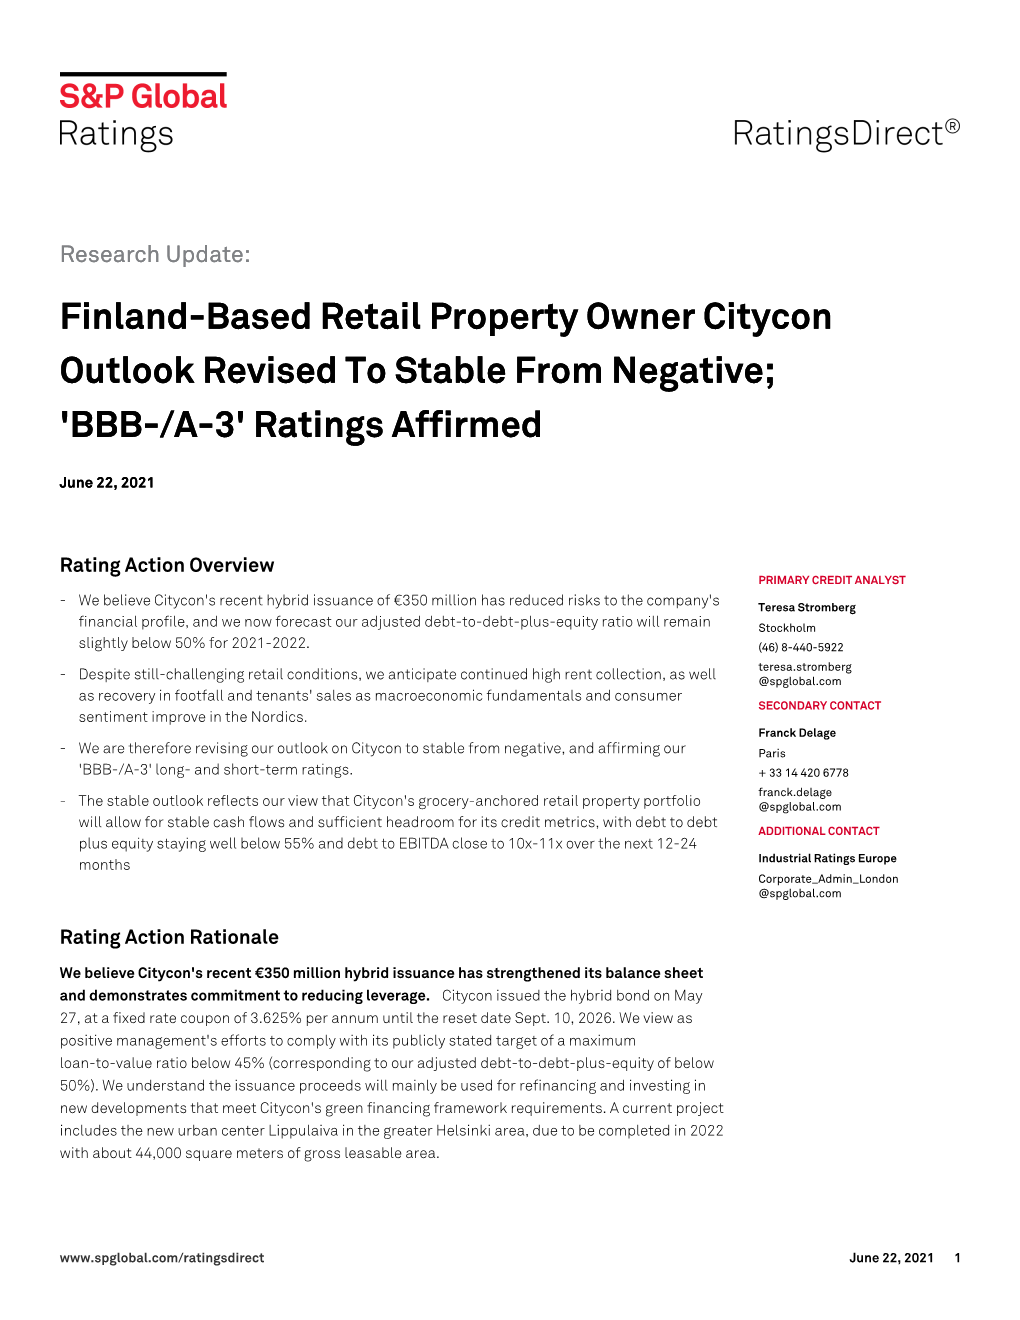 Finland-Based Retail Property Owner Citycon Outlook Revised to Stable from Negative; 'BBB-/A-3' Ratings Affirmed